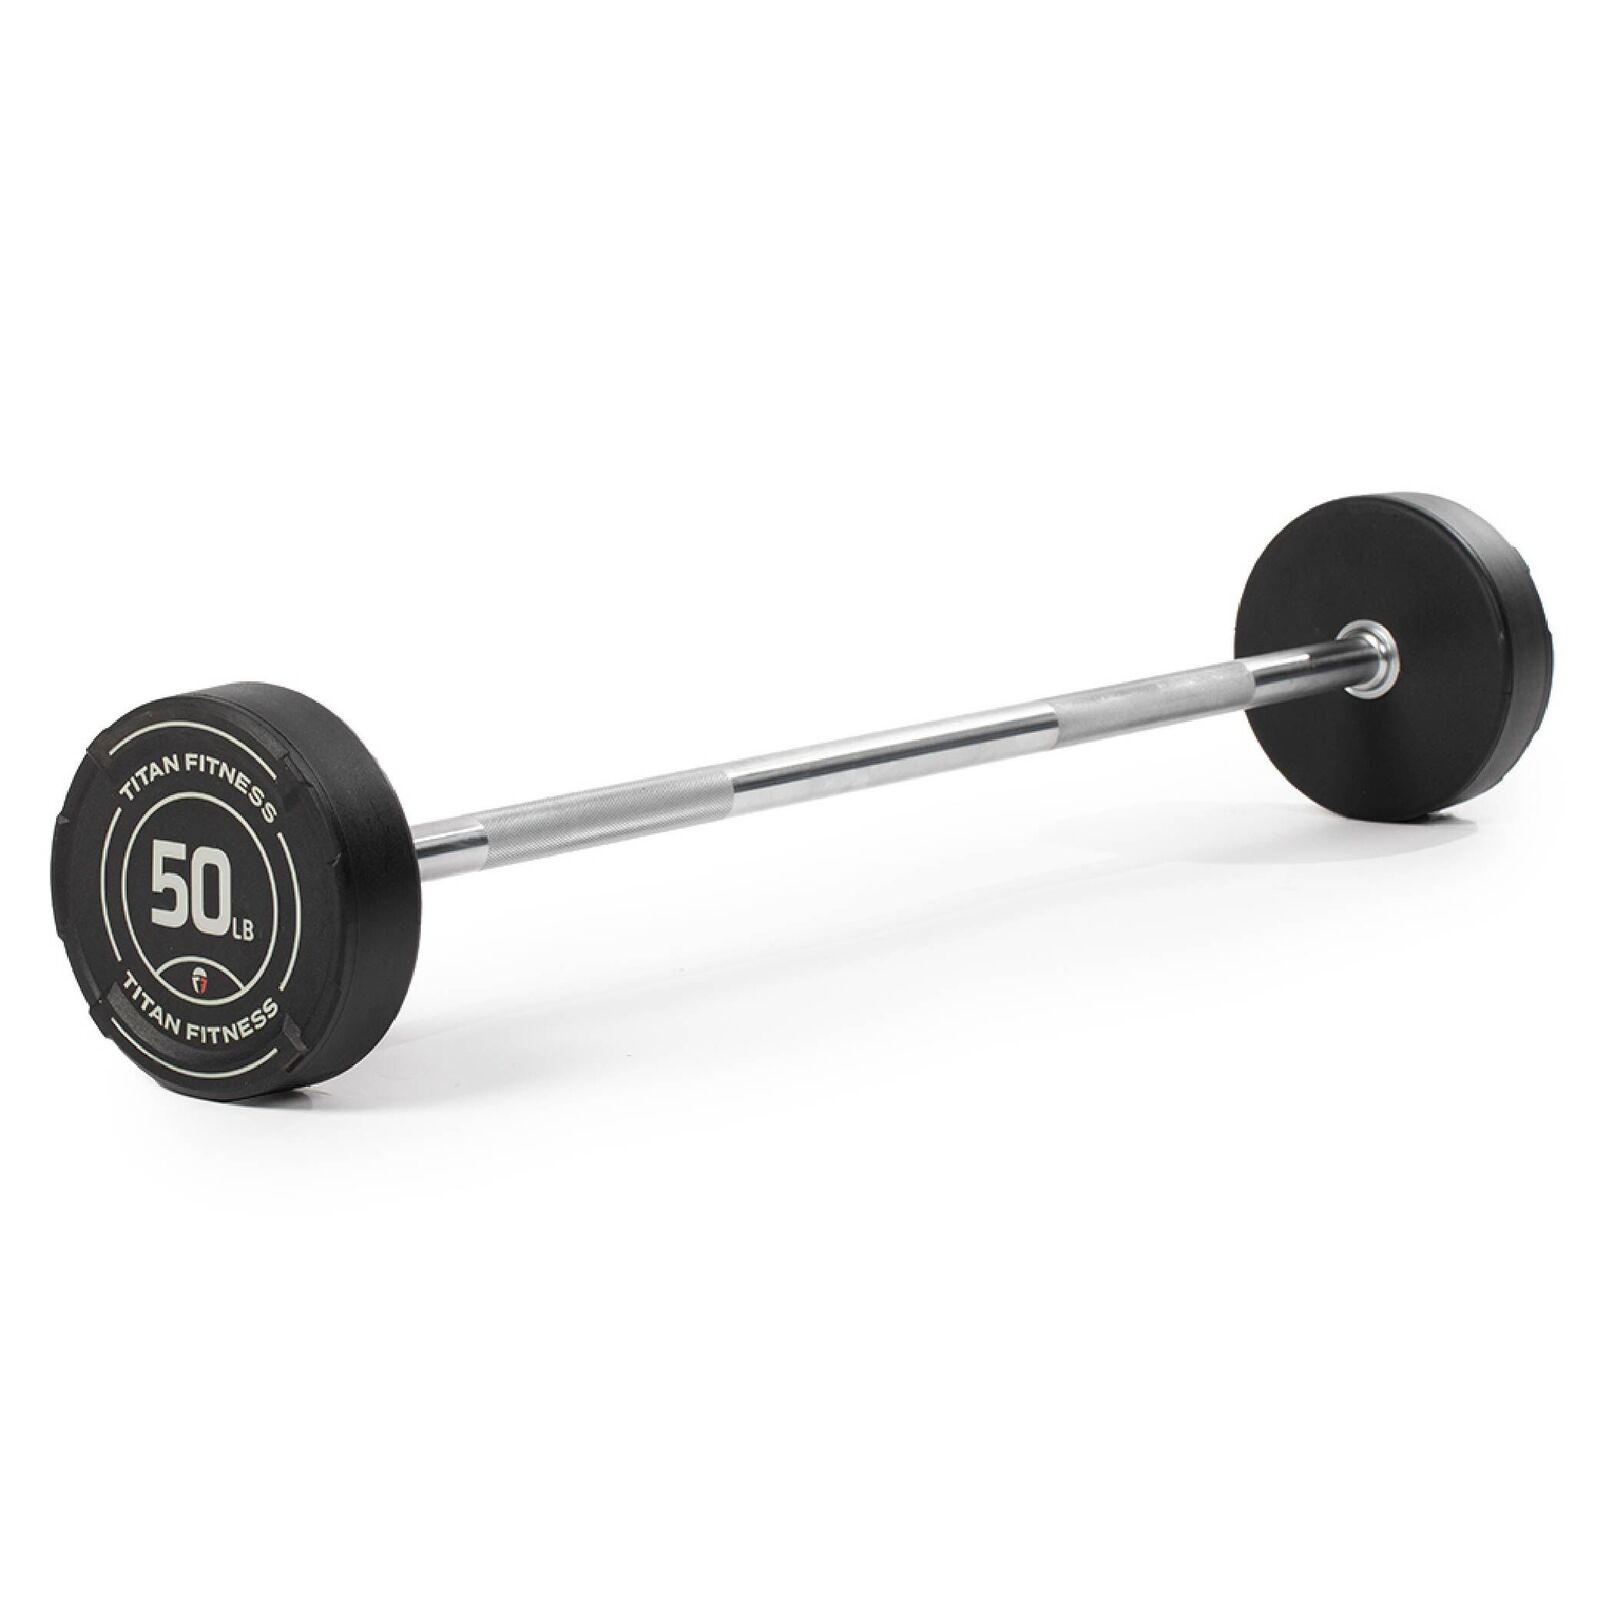 Titan Fitness 50 LB Rubber Straight Fixed Barbell, Pre-Loaded Weight Bar